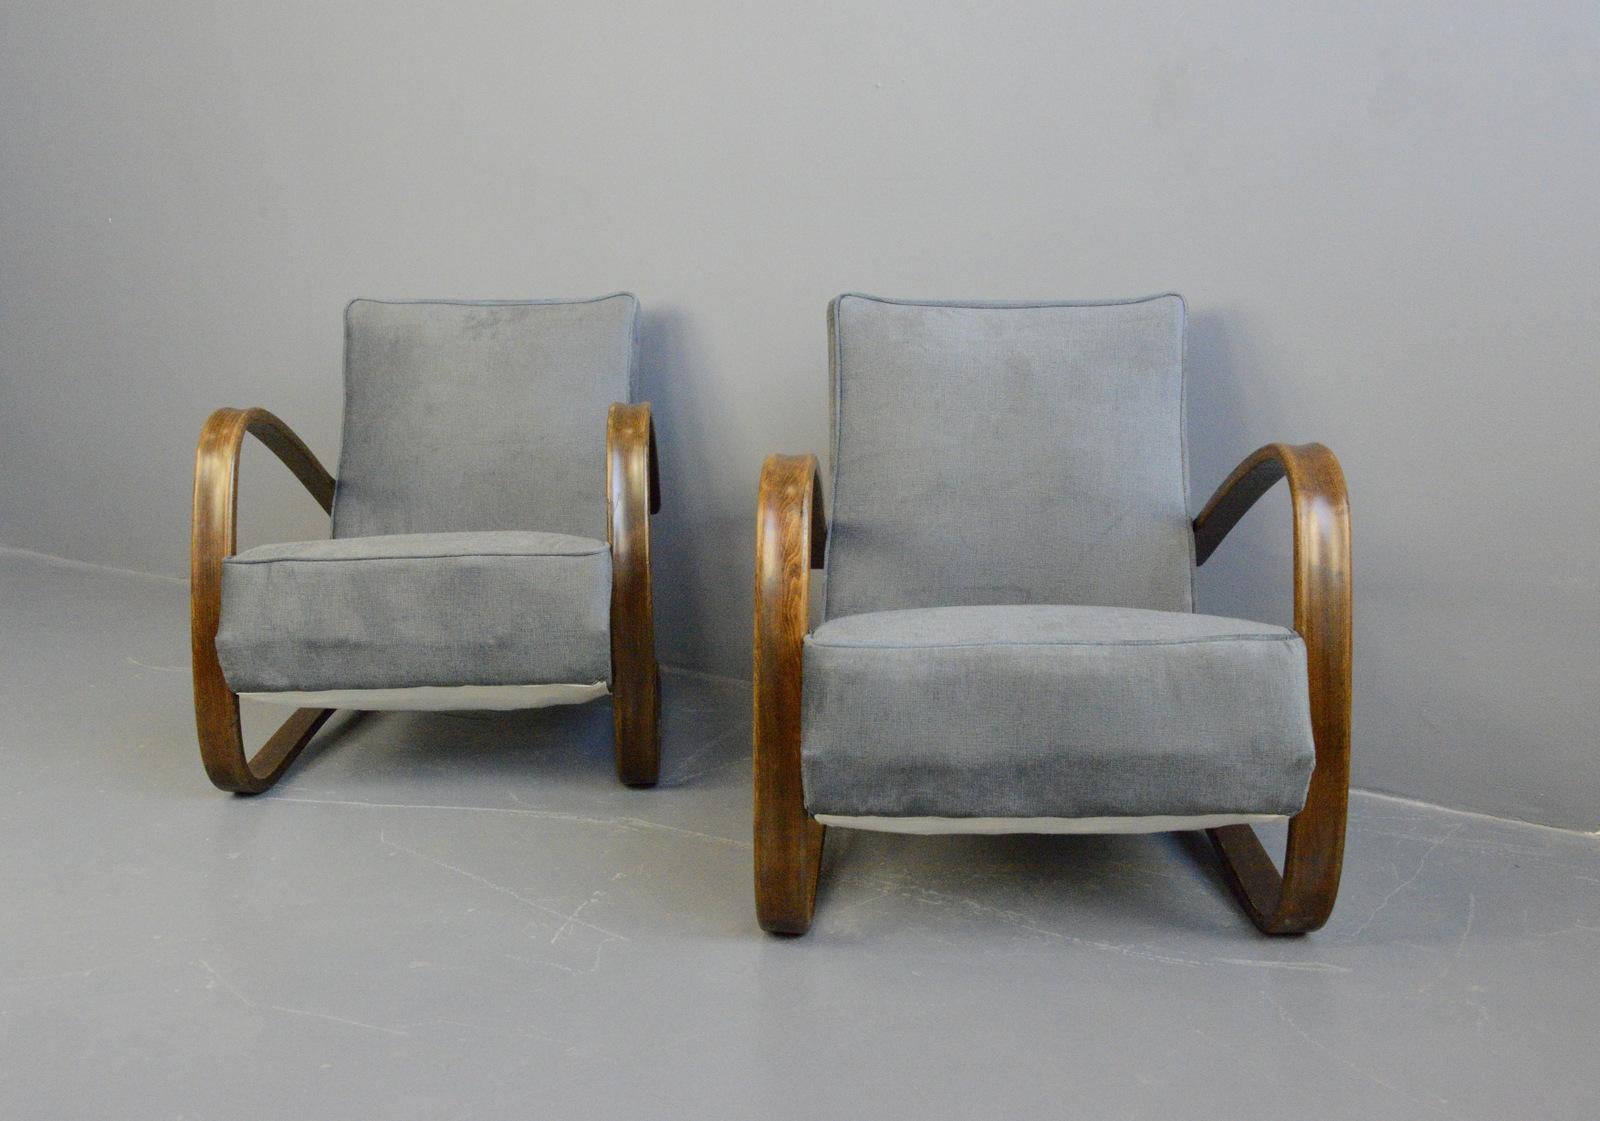 Model H269 armchairs by Jindrich Halabala, Circa 1930s

- Price is for the pair
- Bentwood ornate frames
- Sprung seats
- New charcoal grey velvet upholstery
- Designed by Jindrich Halabala 
- Produced by UP Závody
- Czech, 1930s
-